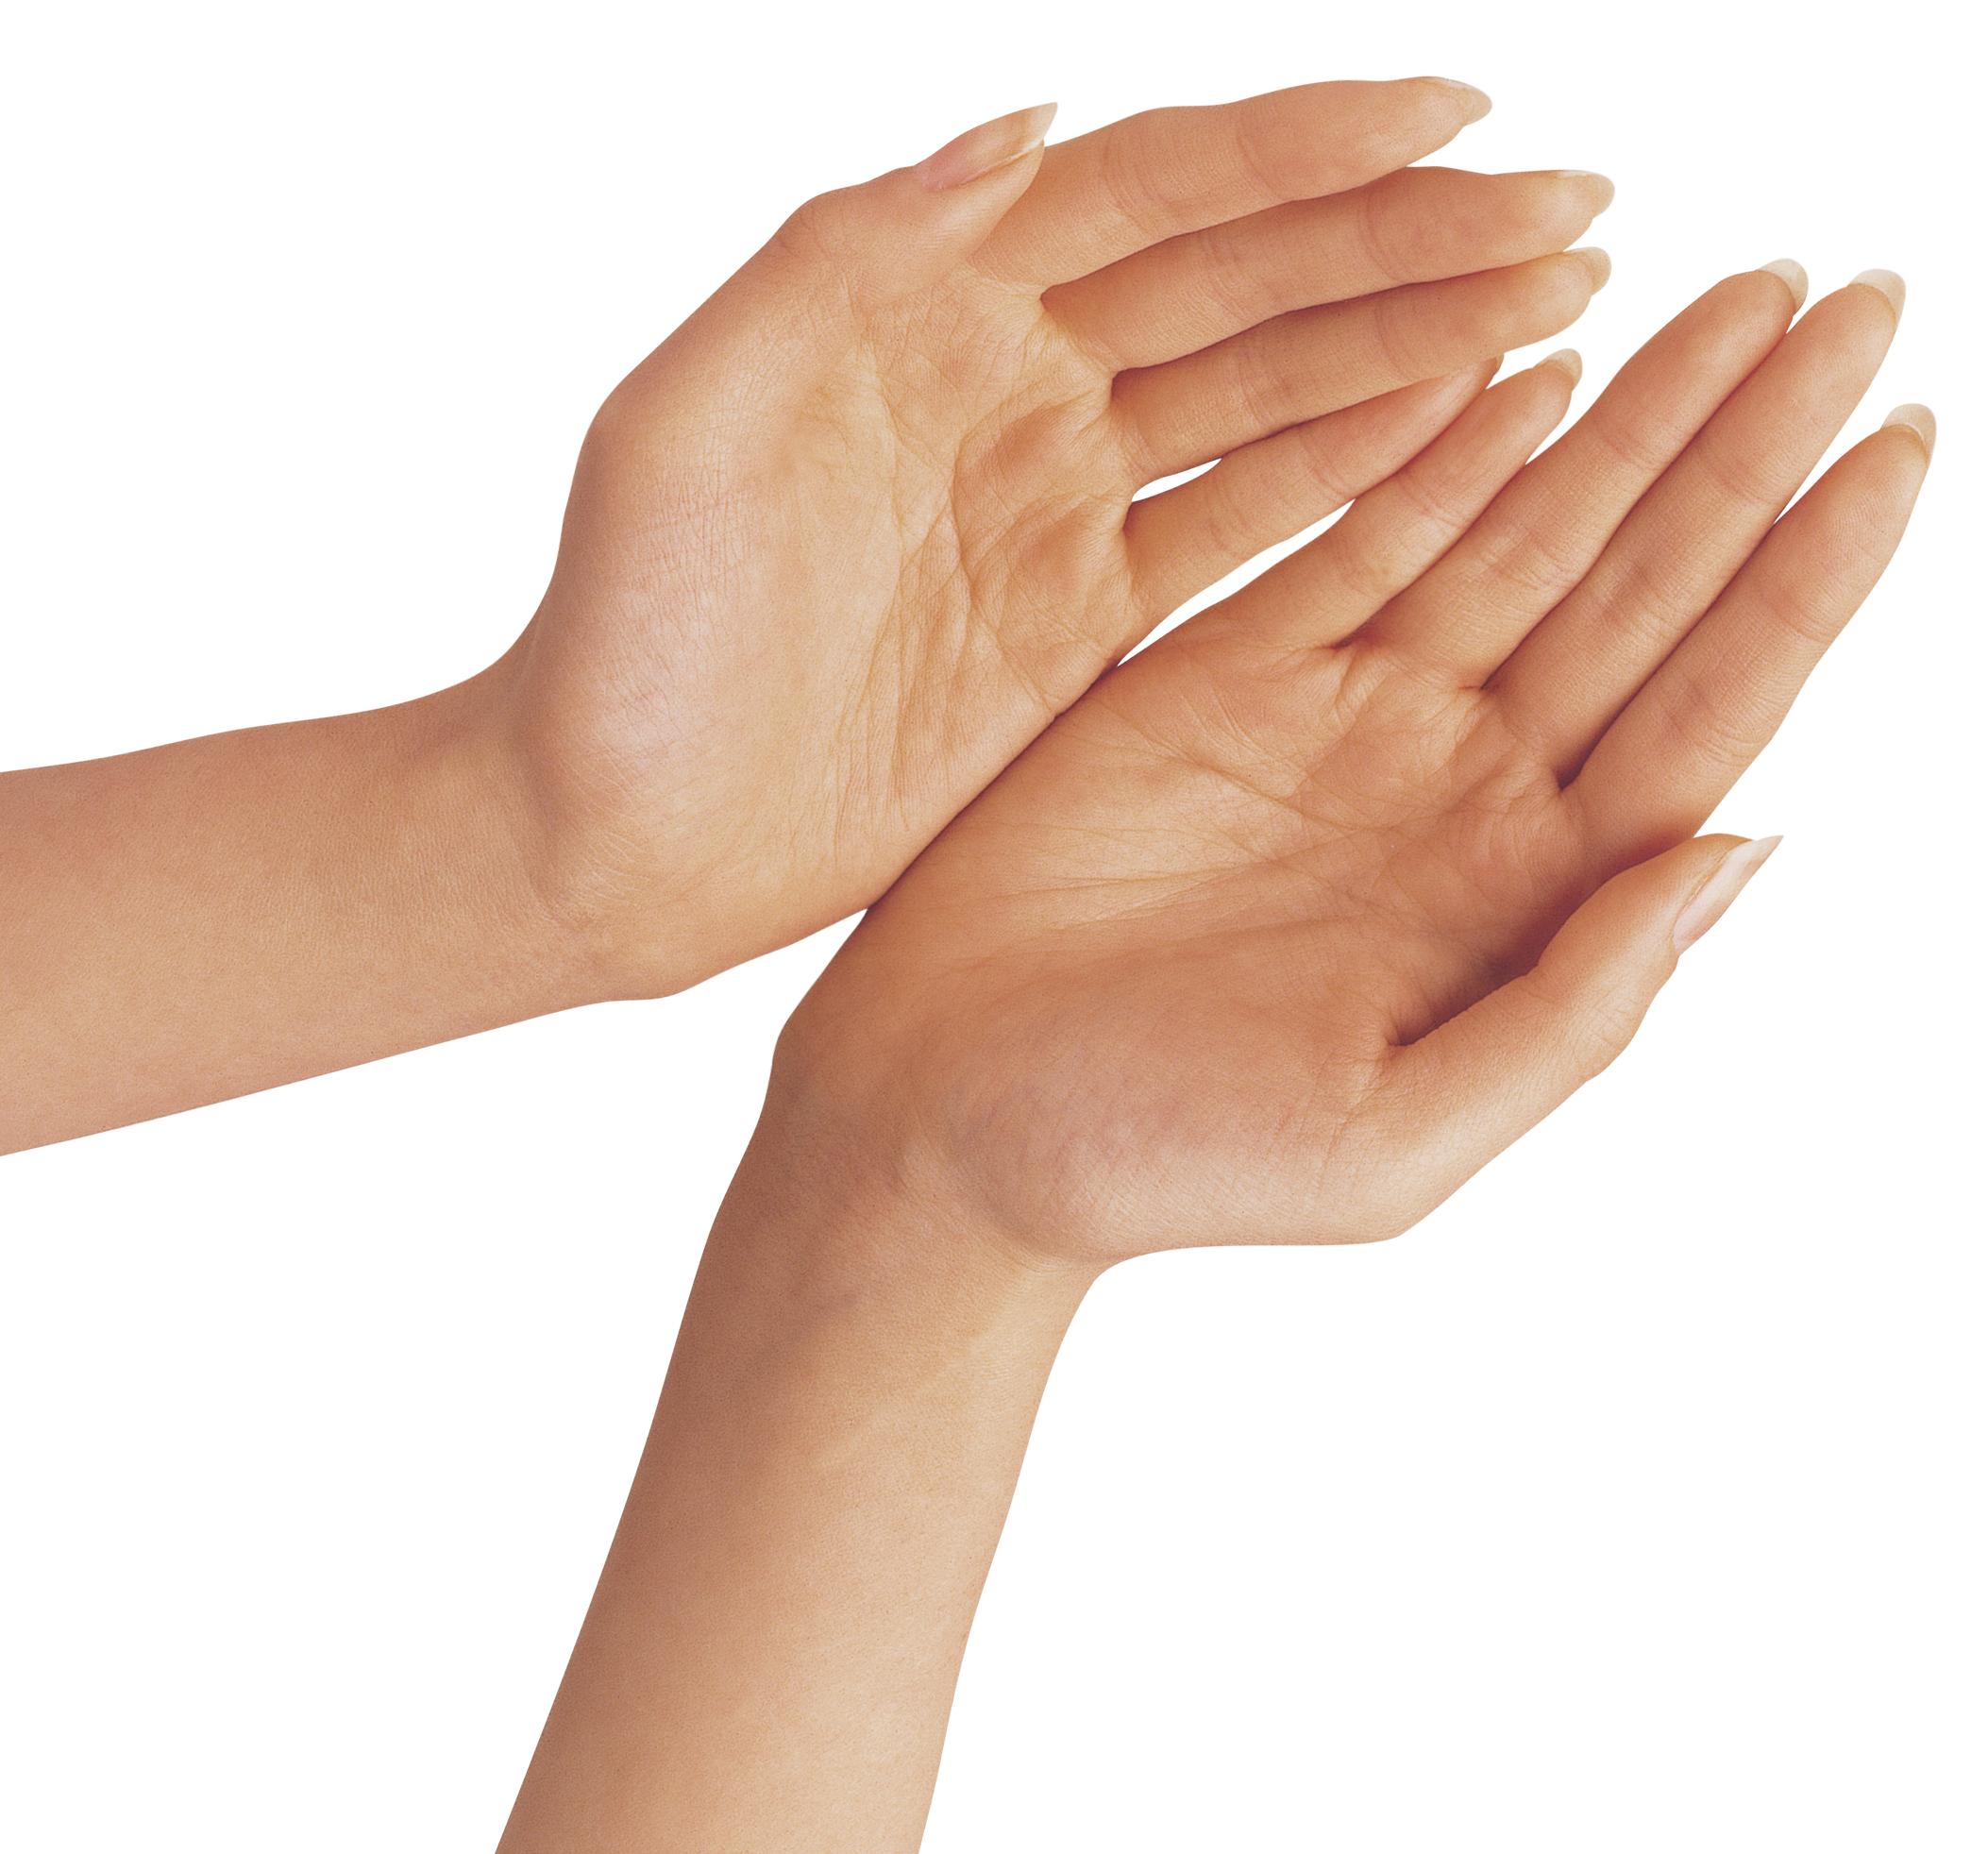 two hands logo png